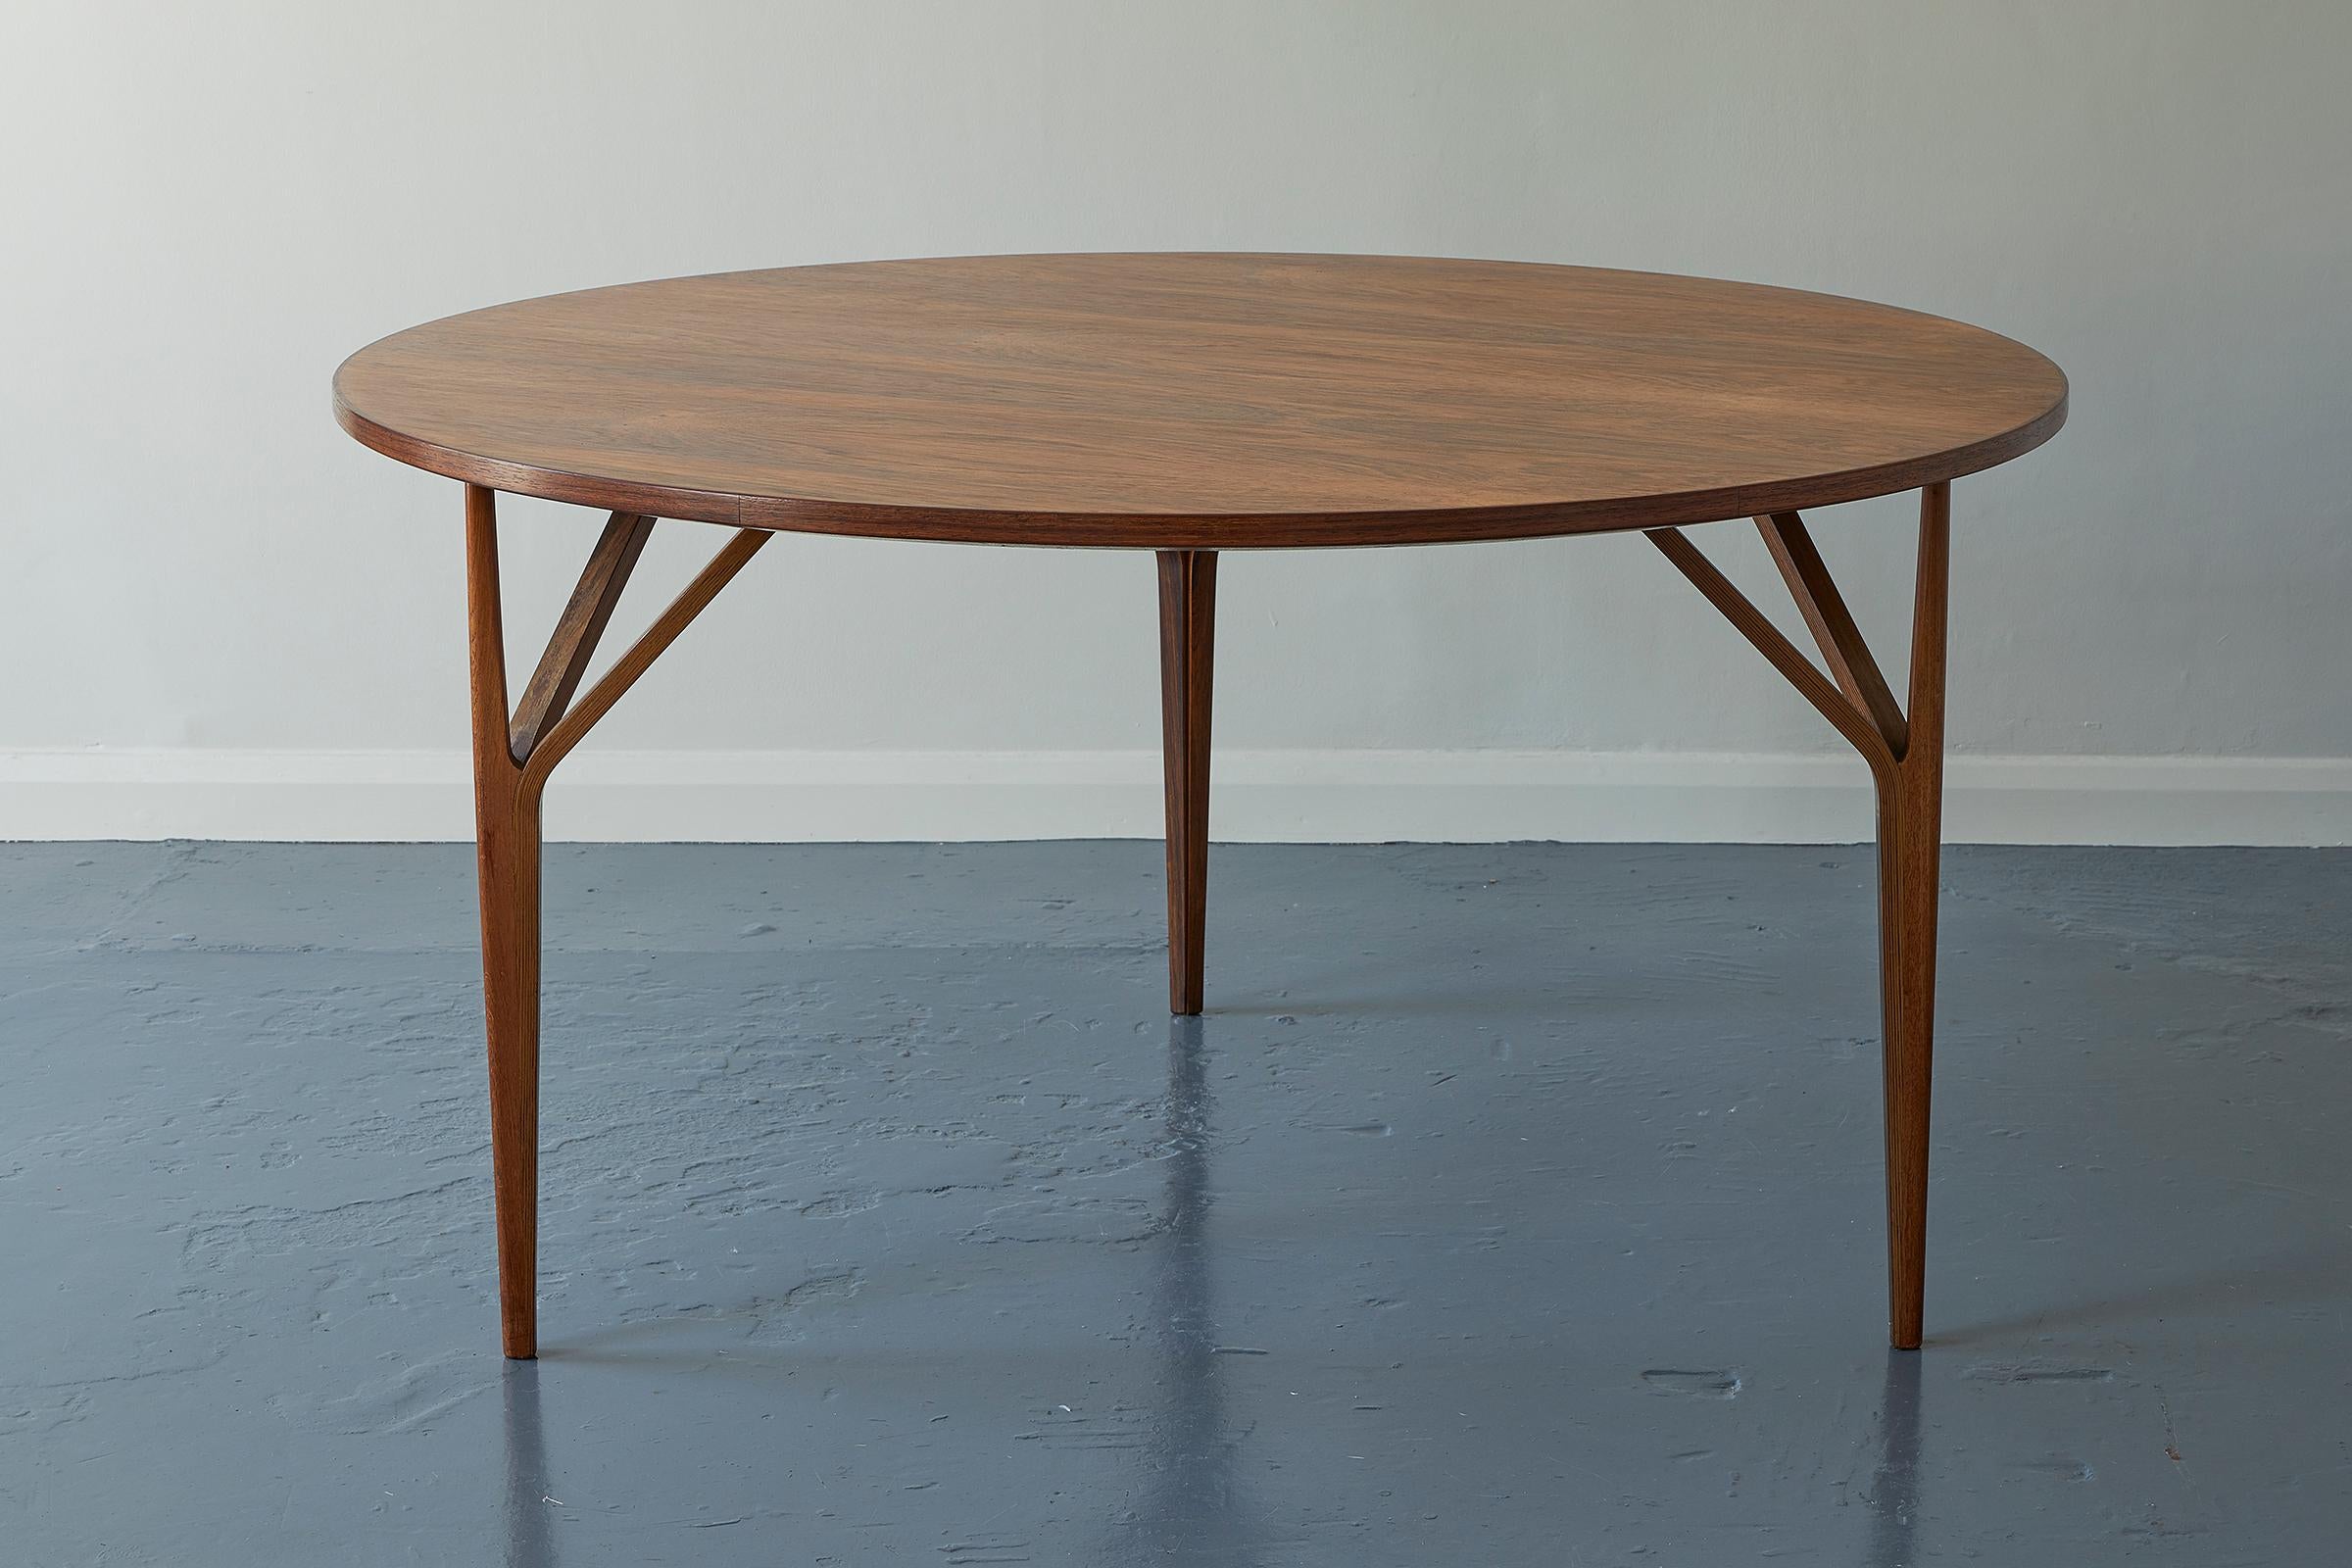 A Danish mid-20th century vintage rosewood dining table, circa 1960s, of circular shape, with a mirrored top, raised on three strut supports.